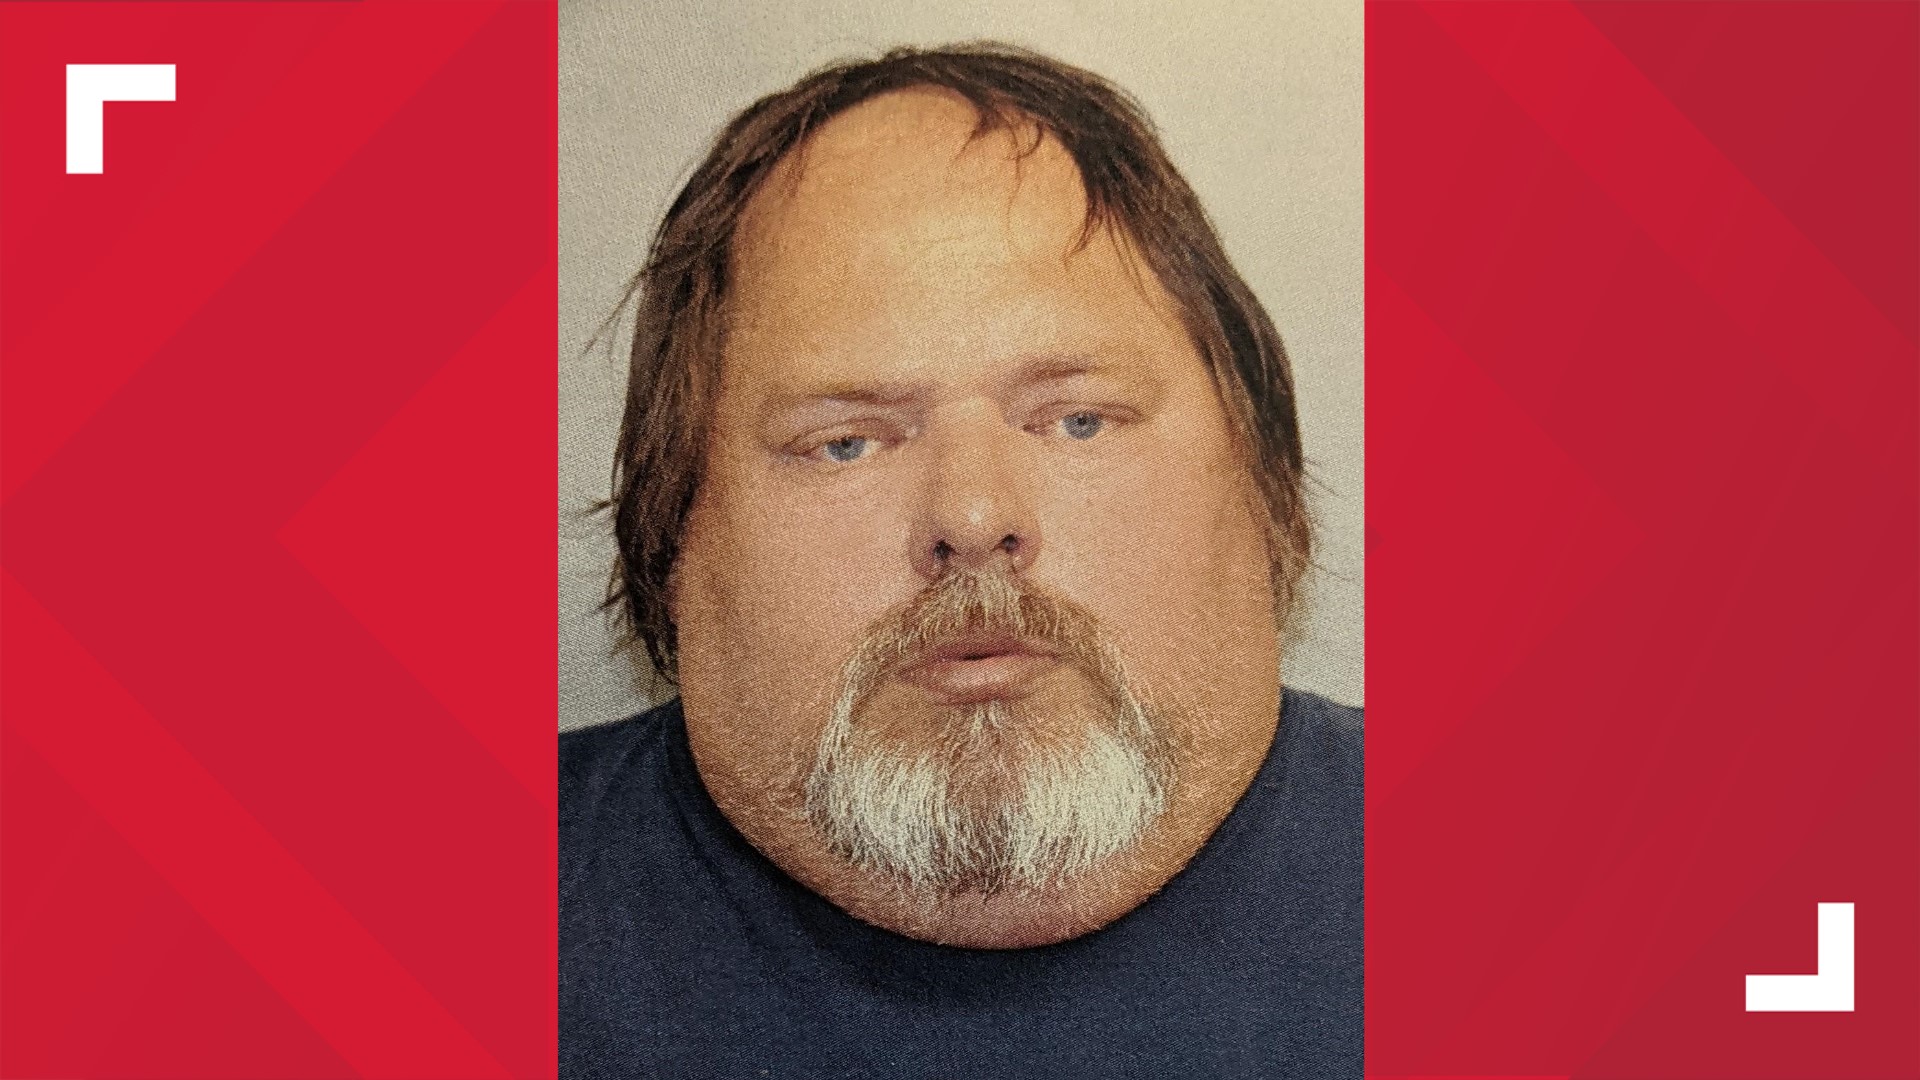 Christopher Speelman, 58, has been charged with robbery, rape, and homicide in the 1987 killing of 85-year-old Edna Laughman.